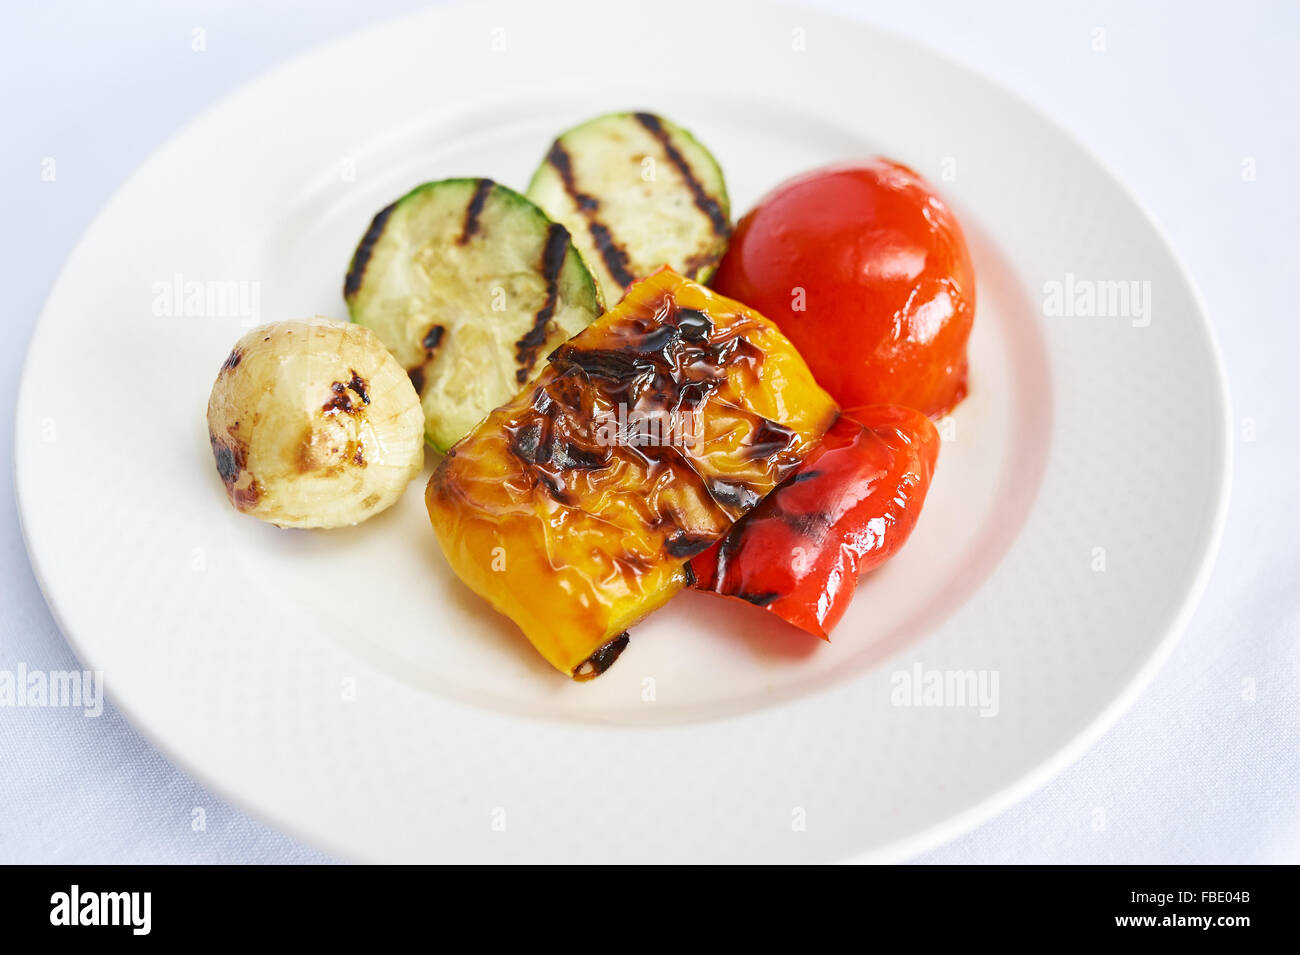 Grilled vegetables on white plate studio shot Stock Photo